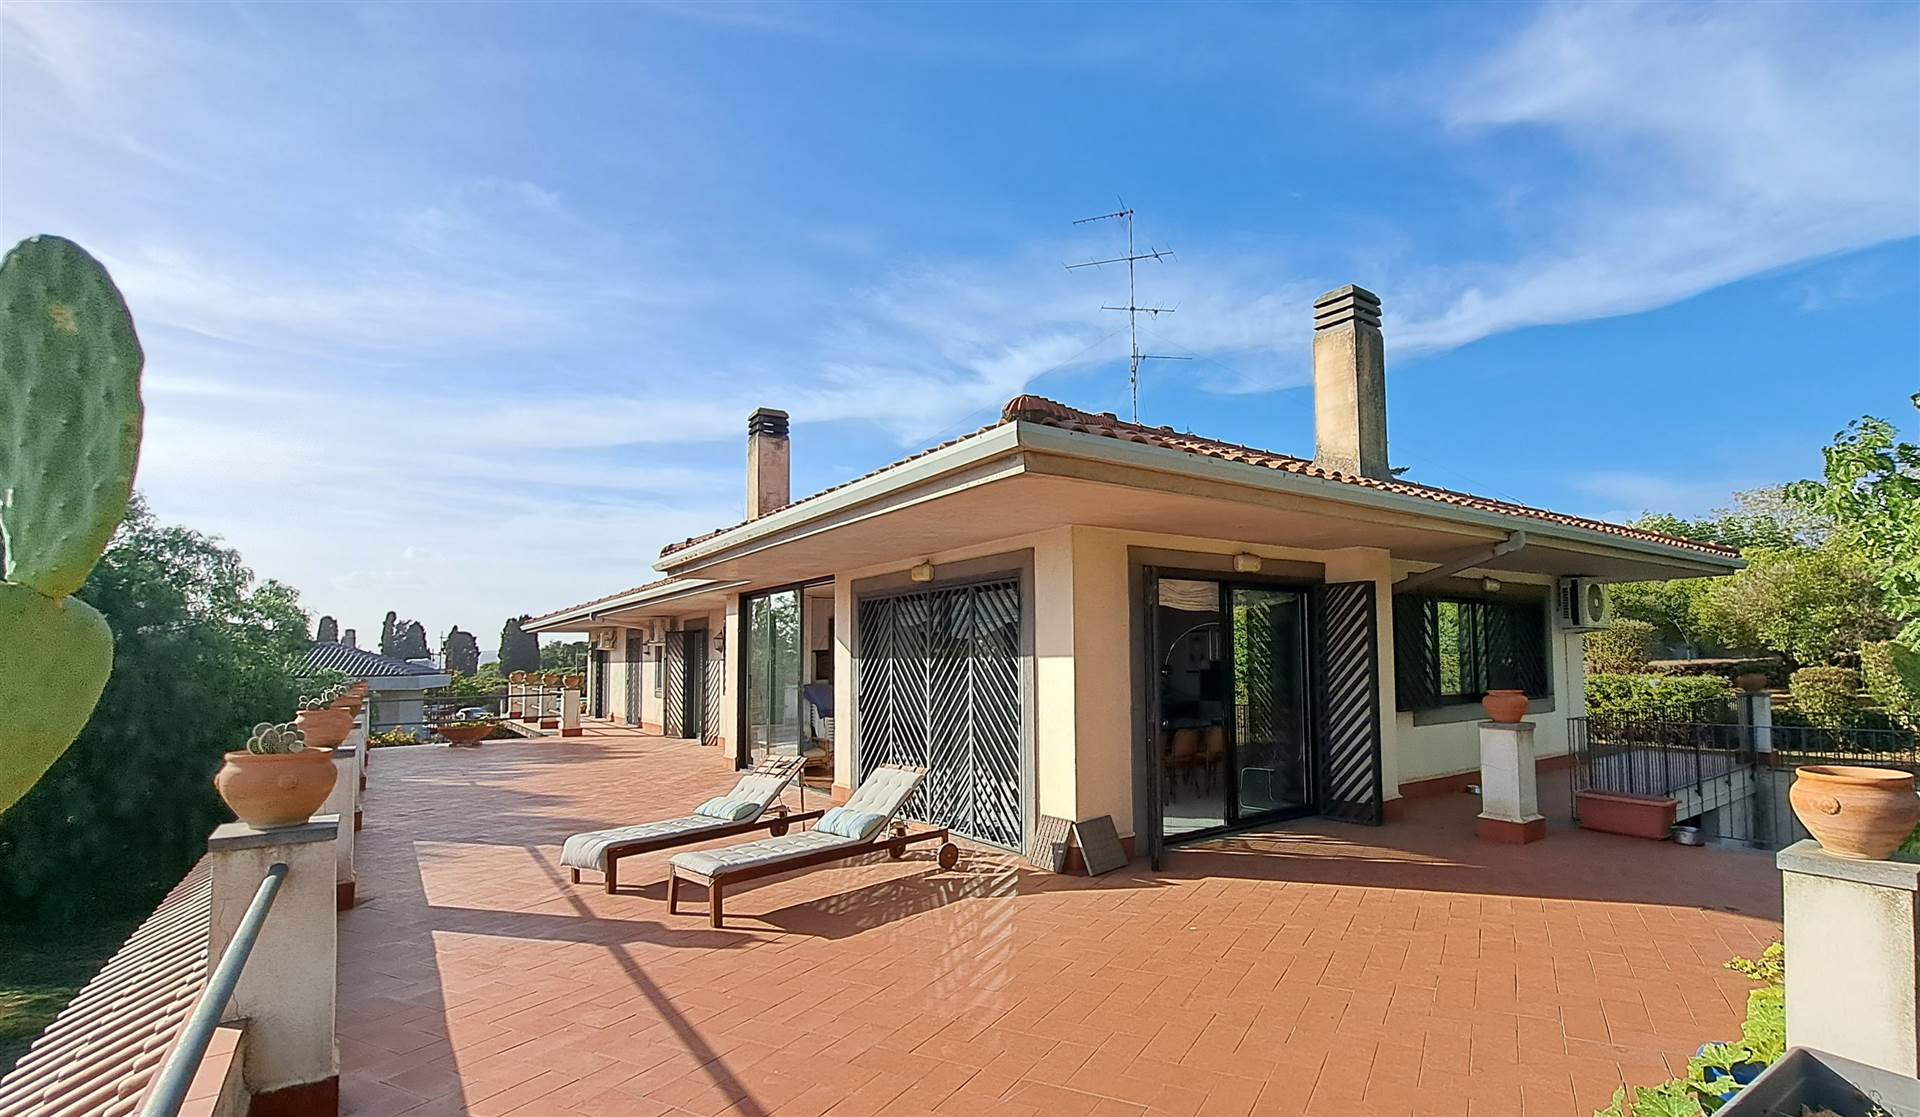 VALVERDE, Villa for sale of 500 Sq. mt., Habitable, Heating Individual heating system, Energetic class: E, placed at Ground, composed by: 13 Rooms, 